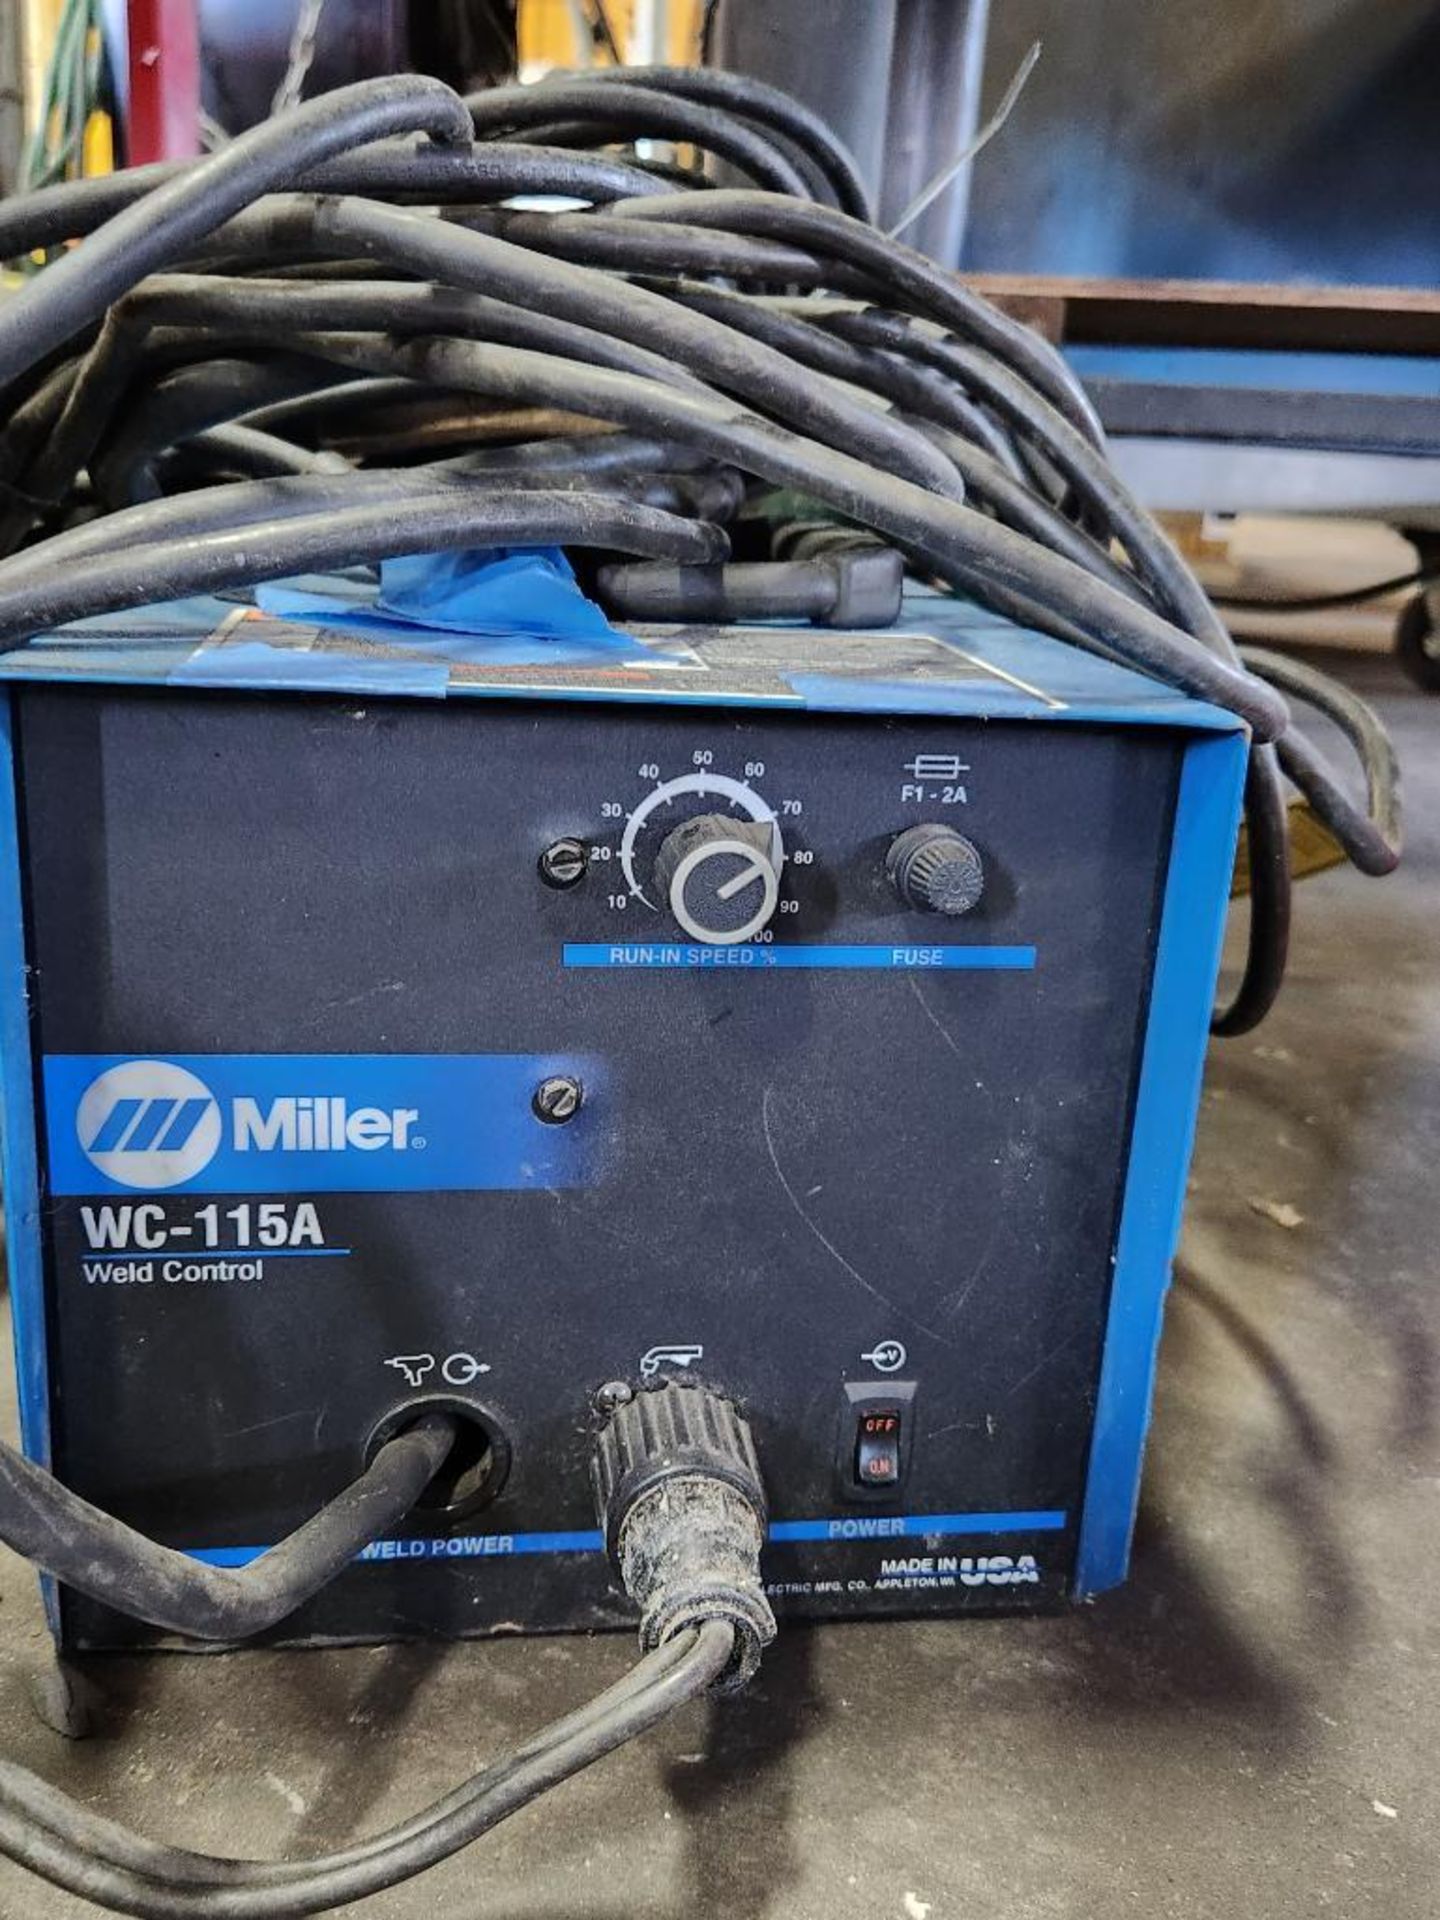 Miller WC-115A Weld Control, 115V, Model 137546-1, S/N LG077311, & Miller Spoolmatic 30A Wire Feeder - Image 2 of 6